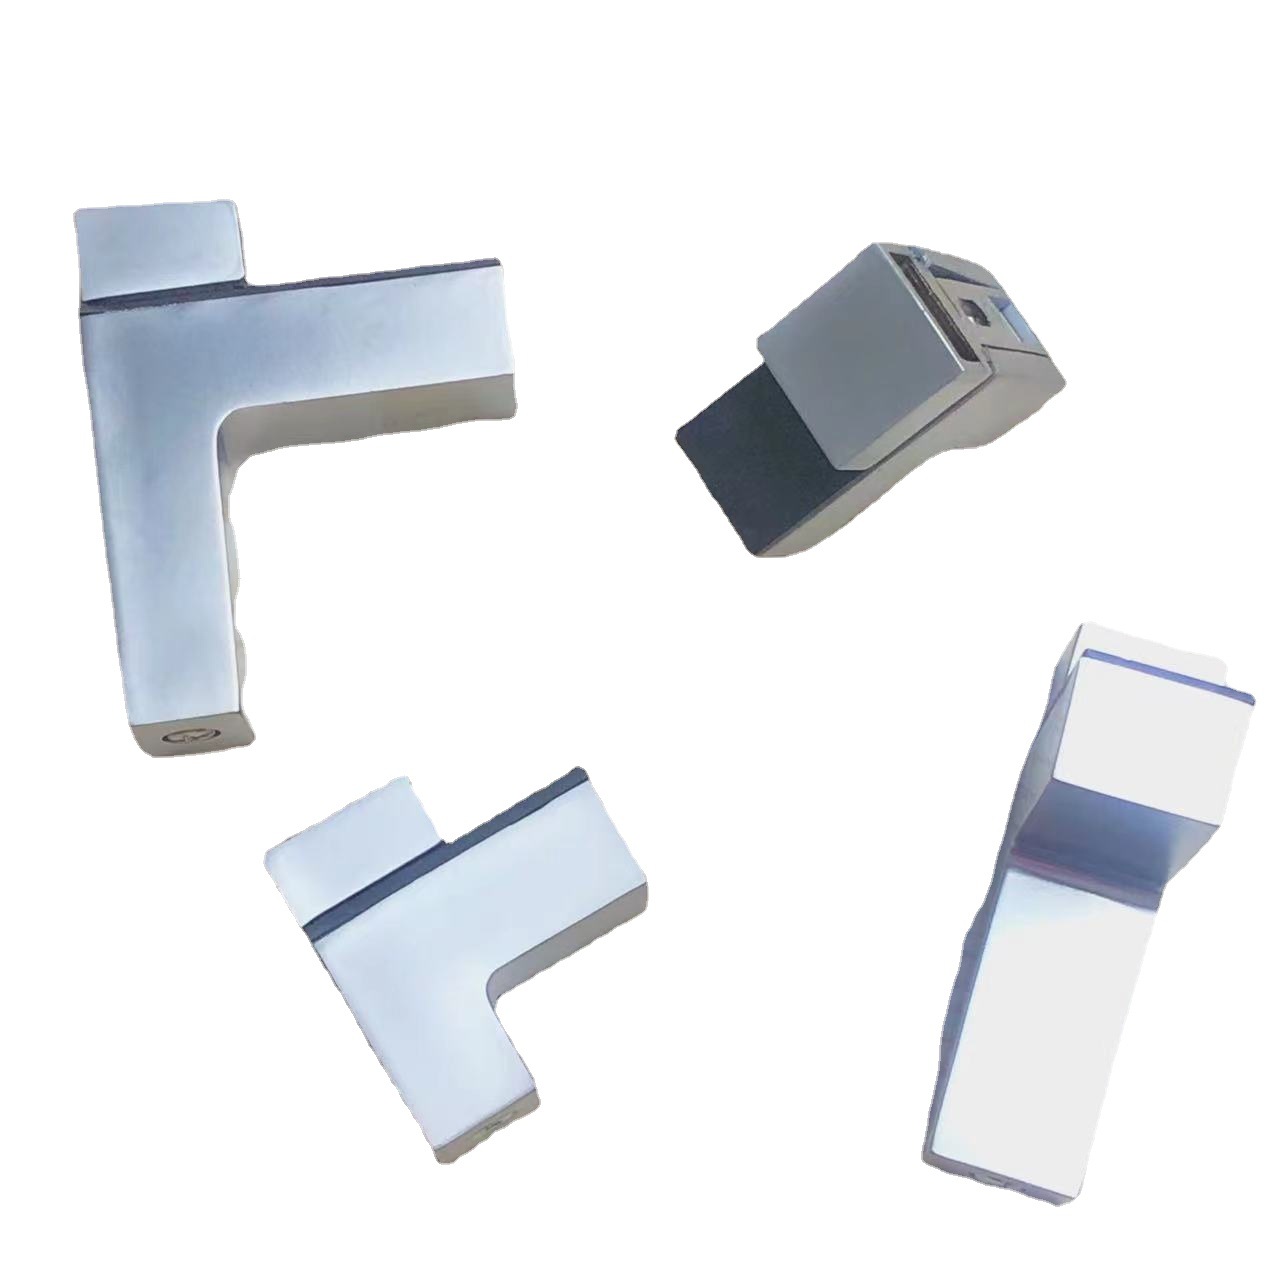 F-shaped glass support clip seven-shaped fixing clip